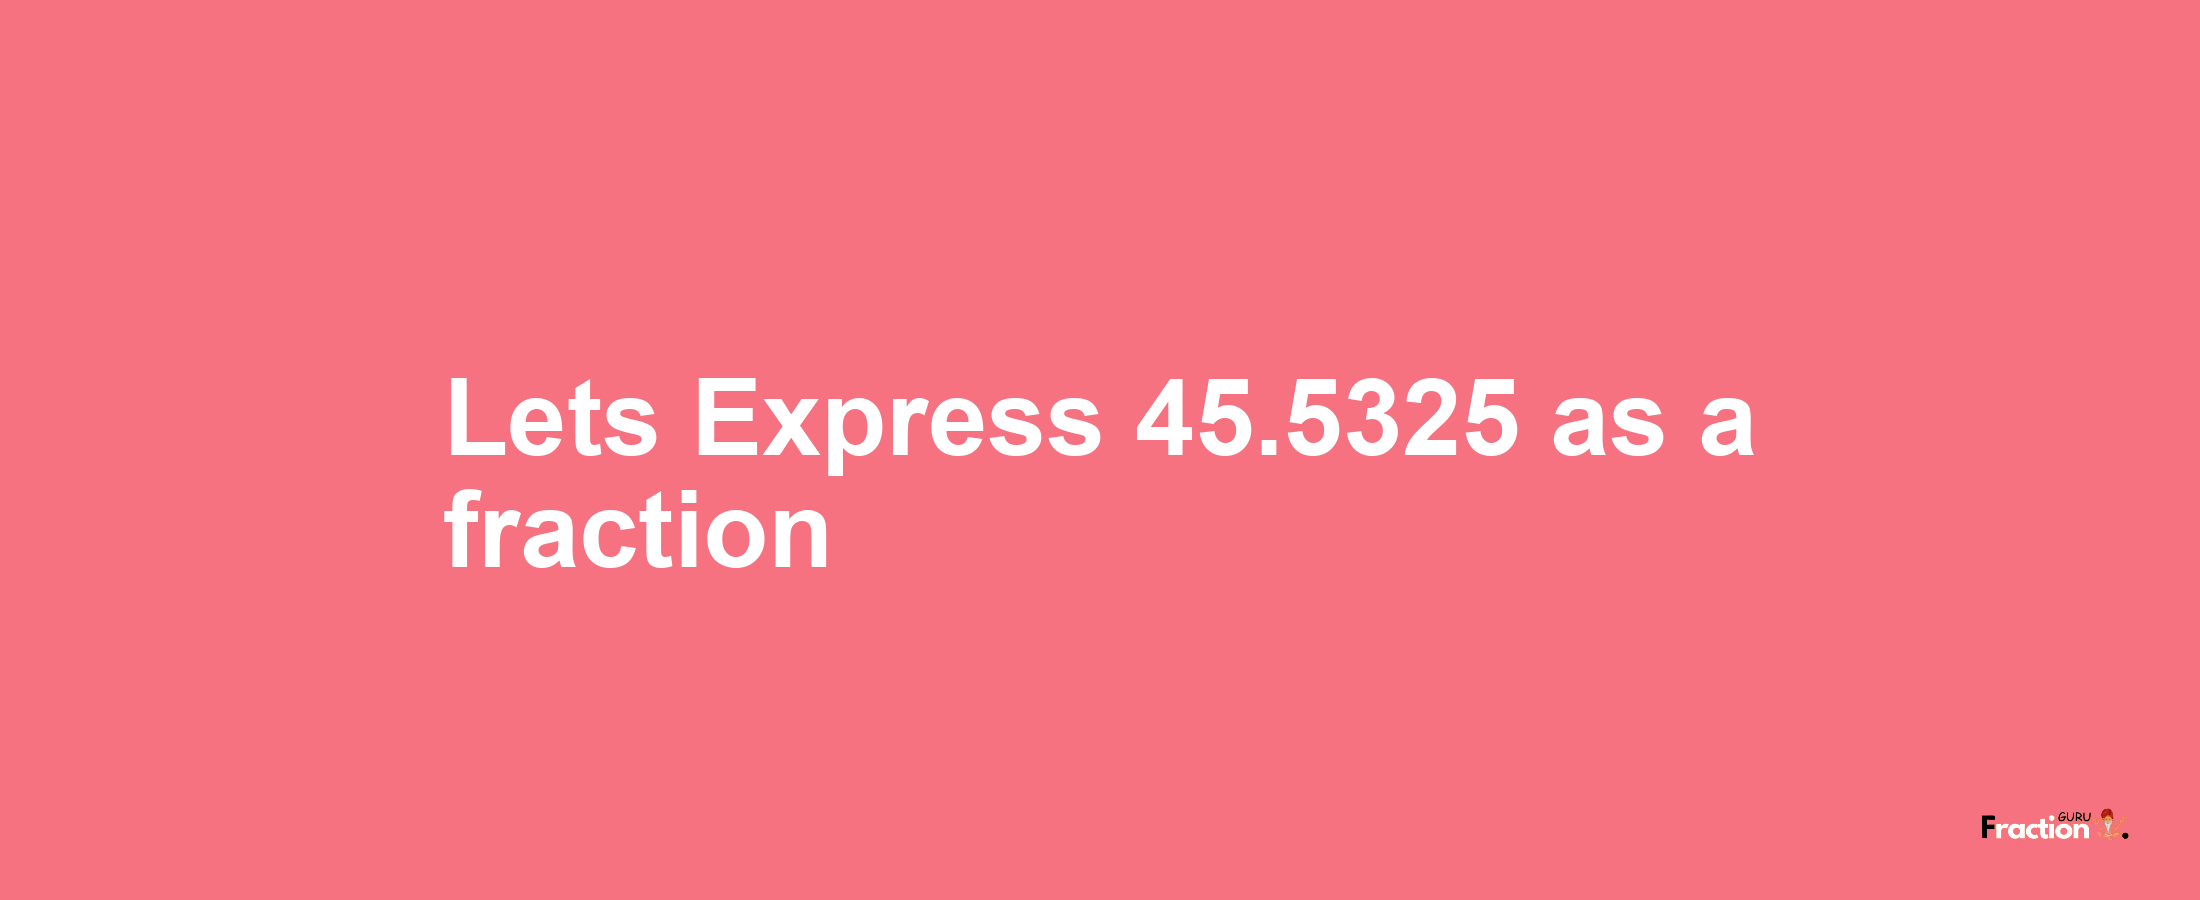 Lets Express 45.5325 as afraction